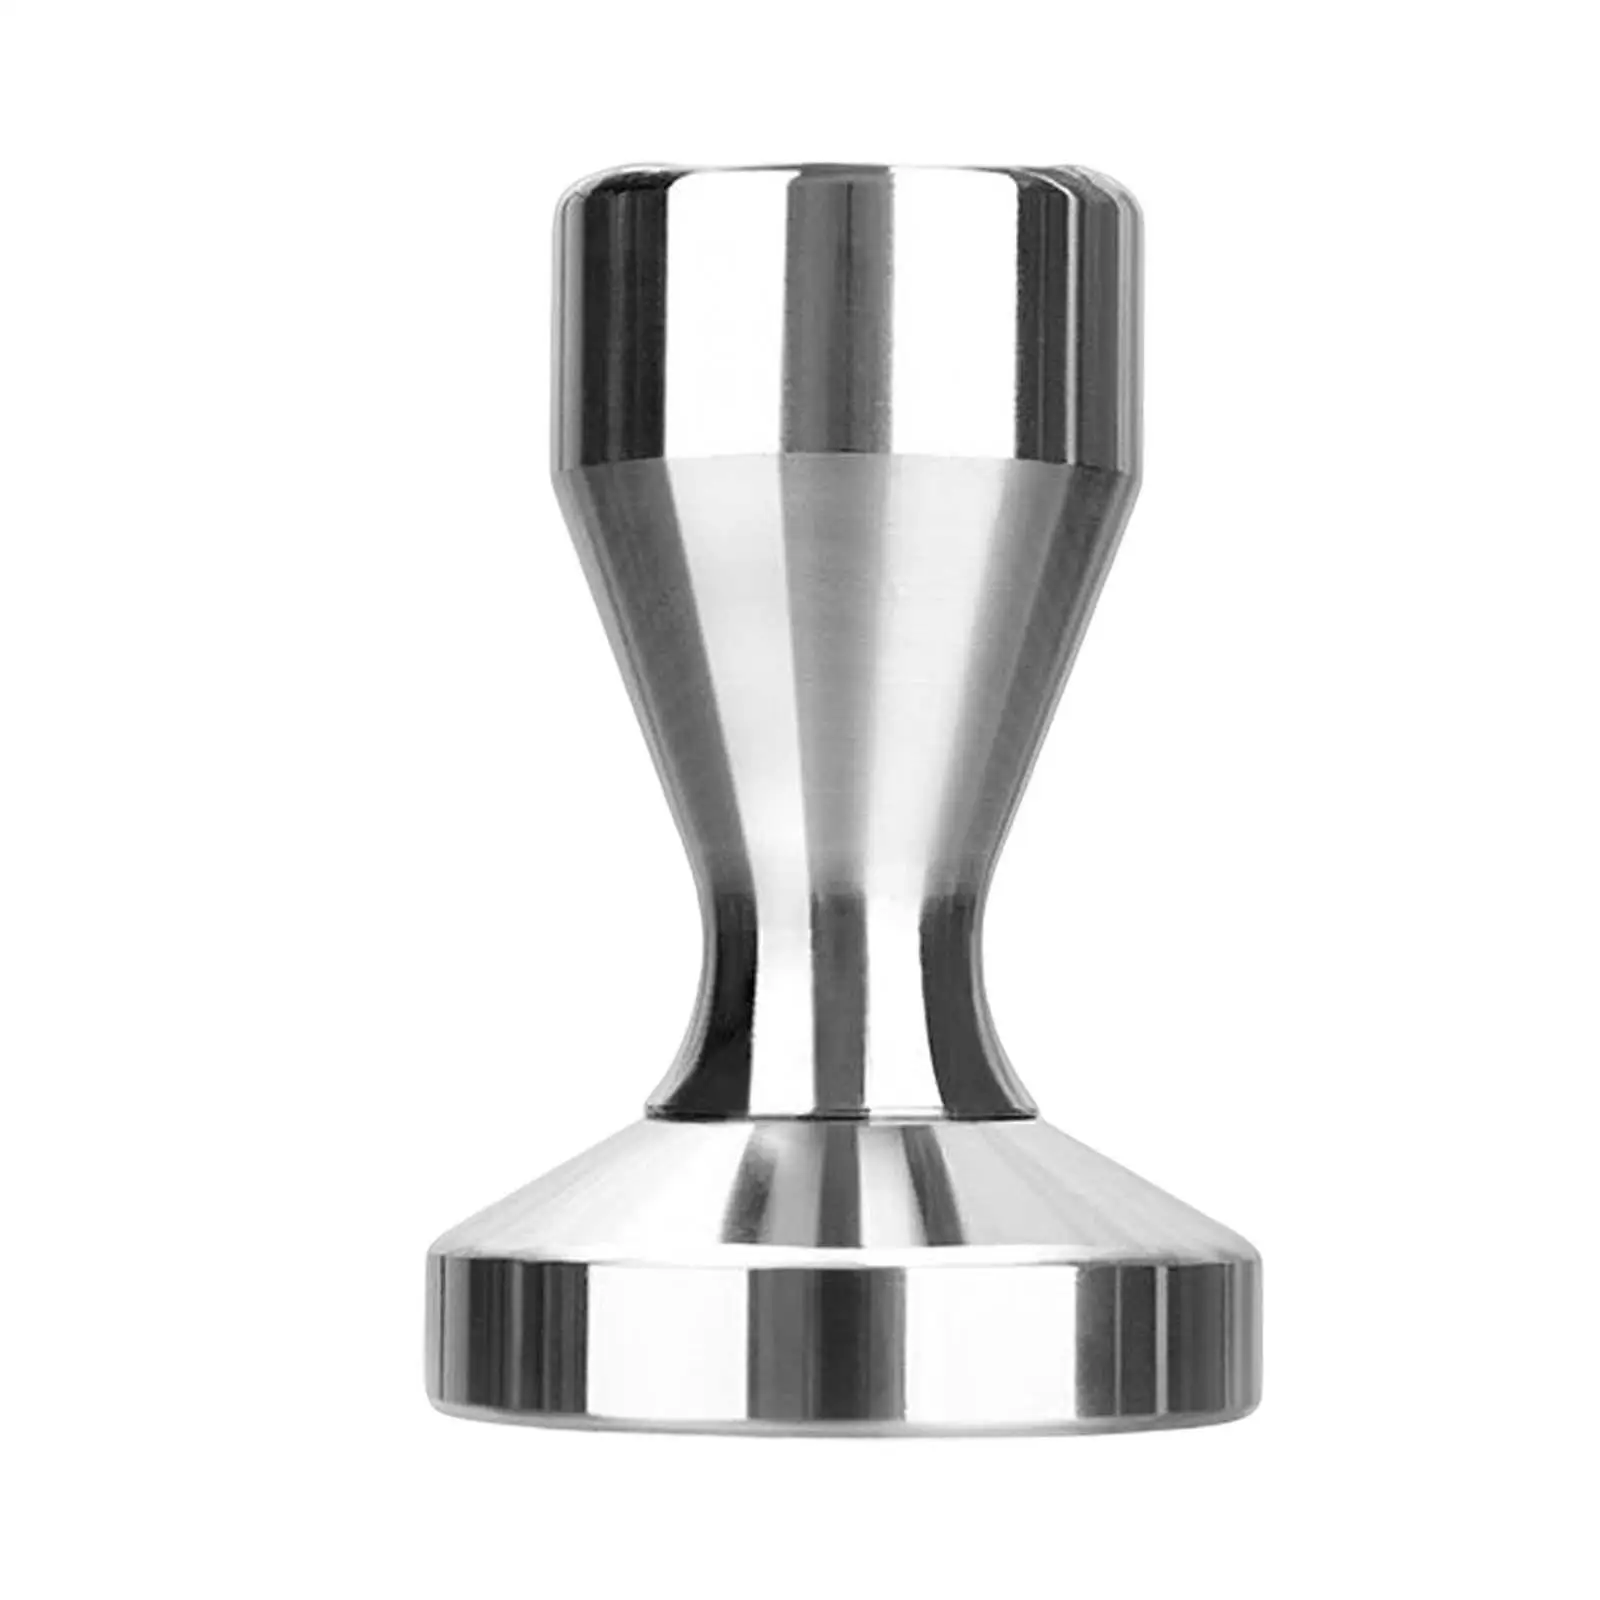 Stainless Steel coffee Tamper Kitchen Utensils Polished Espresso Pressing Tool Distributor for Cafe office Home